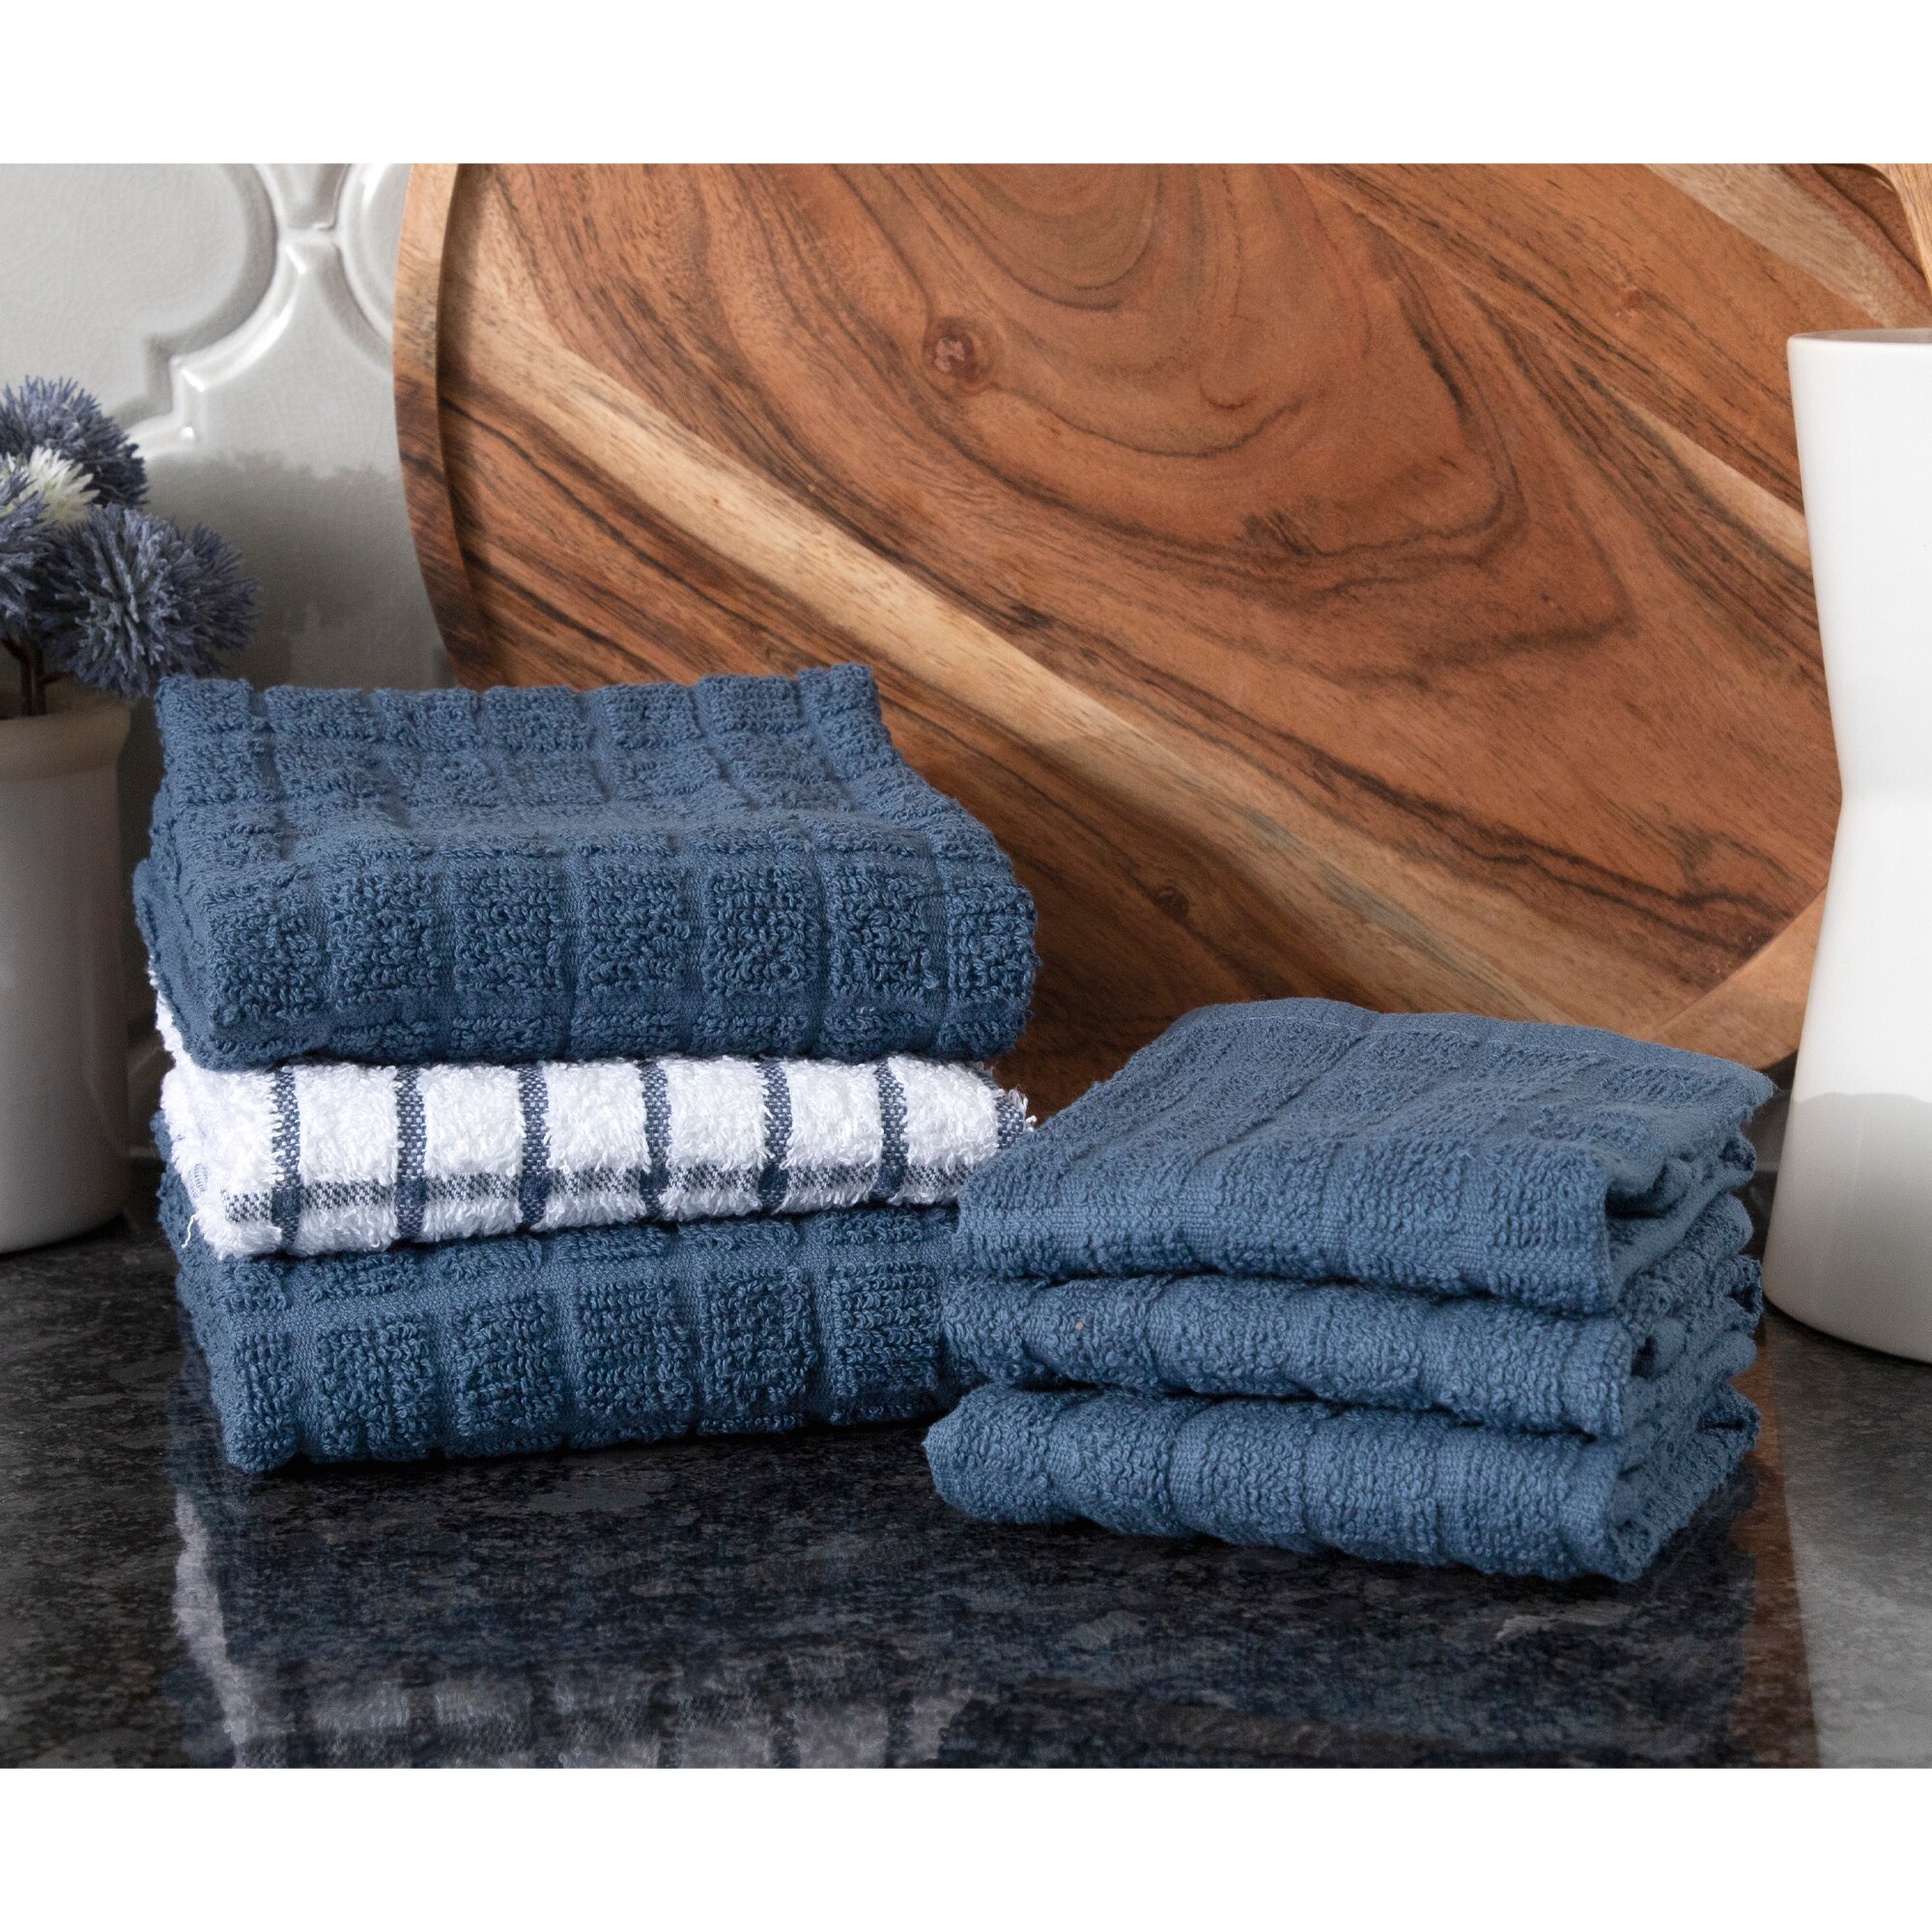 https://ak1.ostkcdn.com/images/products/is/images/direct/ae97ea2439f043f2f37812ddce70115803563fcb/RITZ-Terry-Kitchen-Towel-and-Dish-Cloth%2C-Set-of-3-Towels-and-3-Dish-Cloths.jpg